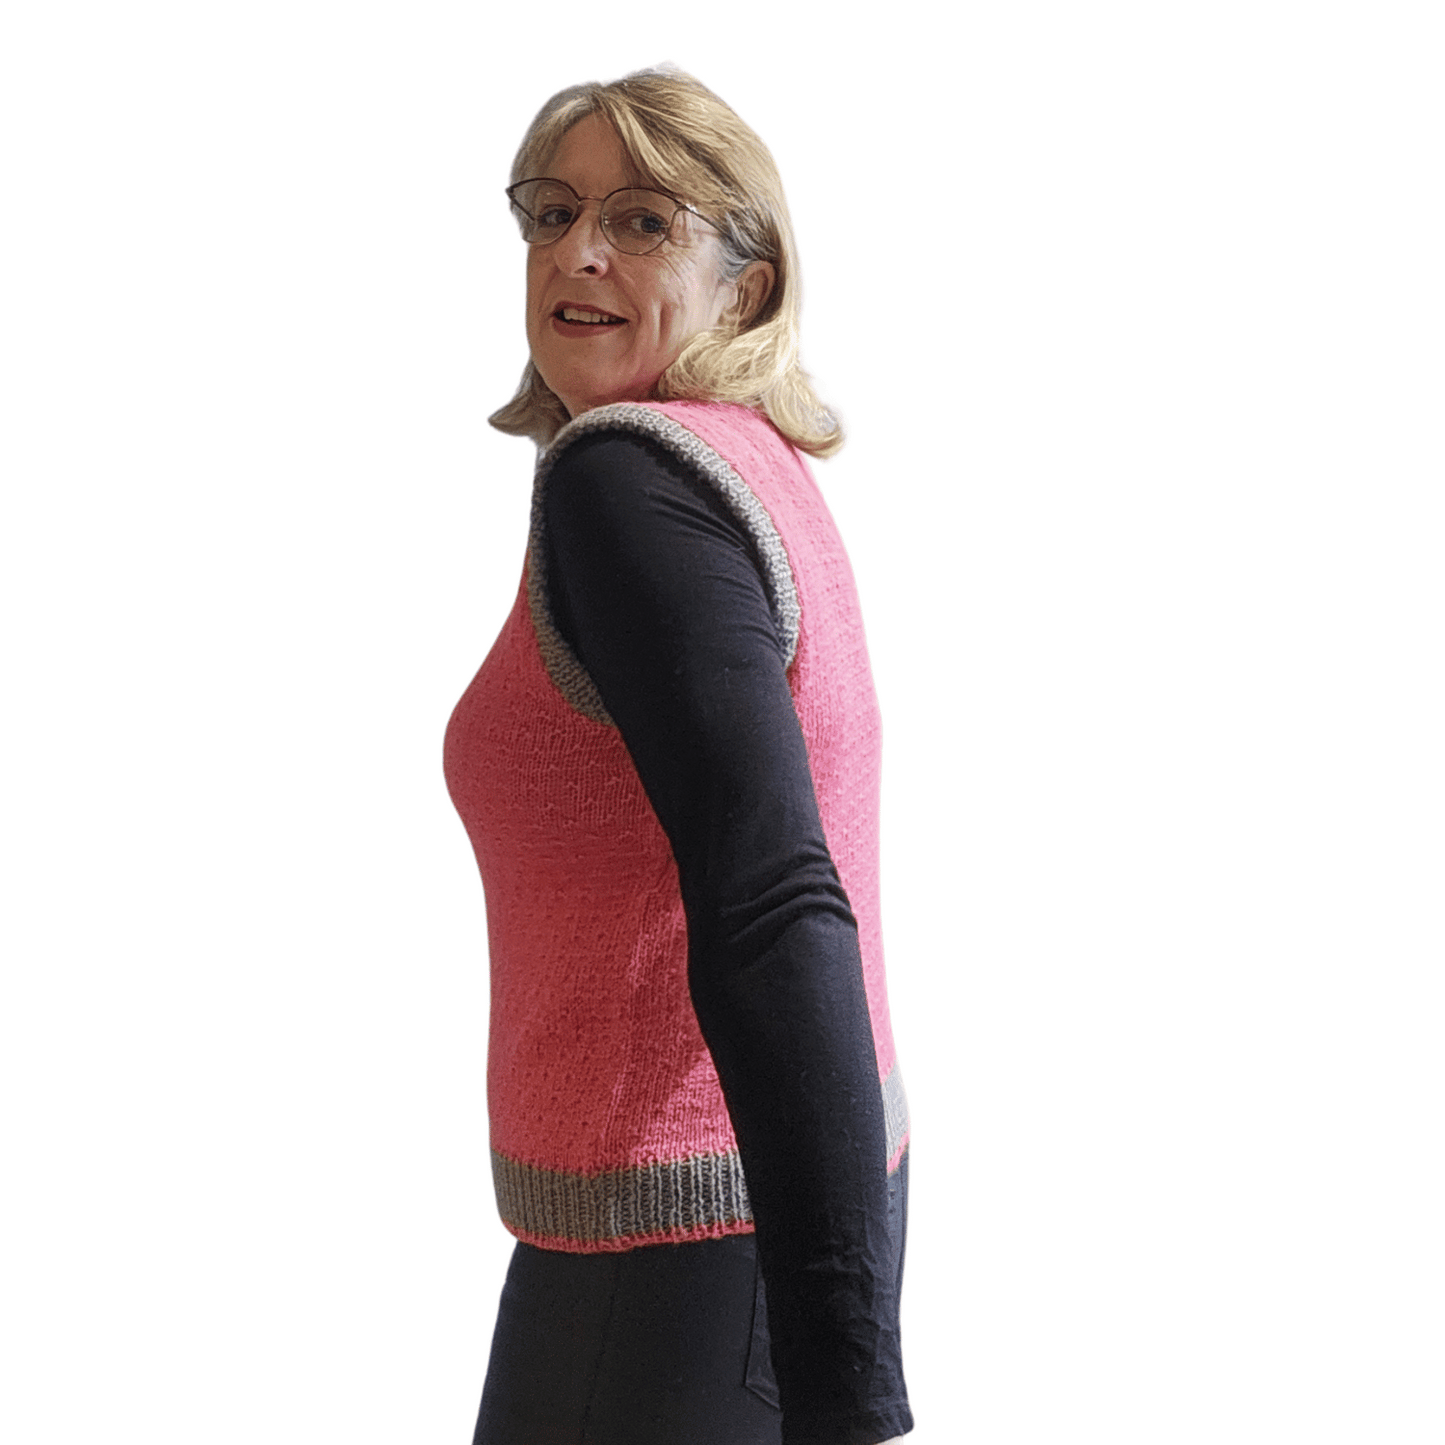 Knitting kit for this sleeveless sweater with a simple pattern detail, using Gorgeous Alpacas alpaca wool - this example in Rose Pink and Grey